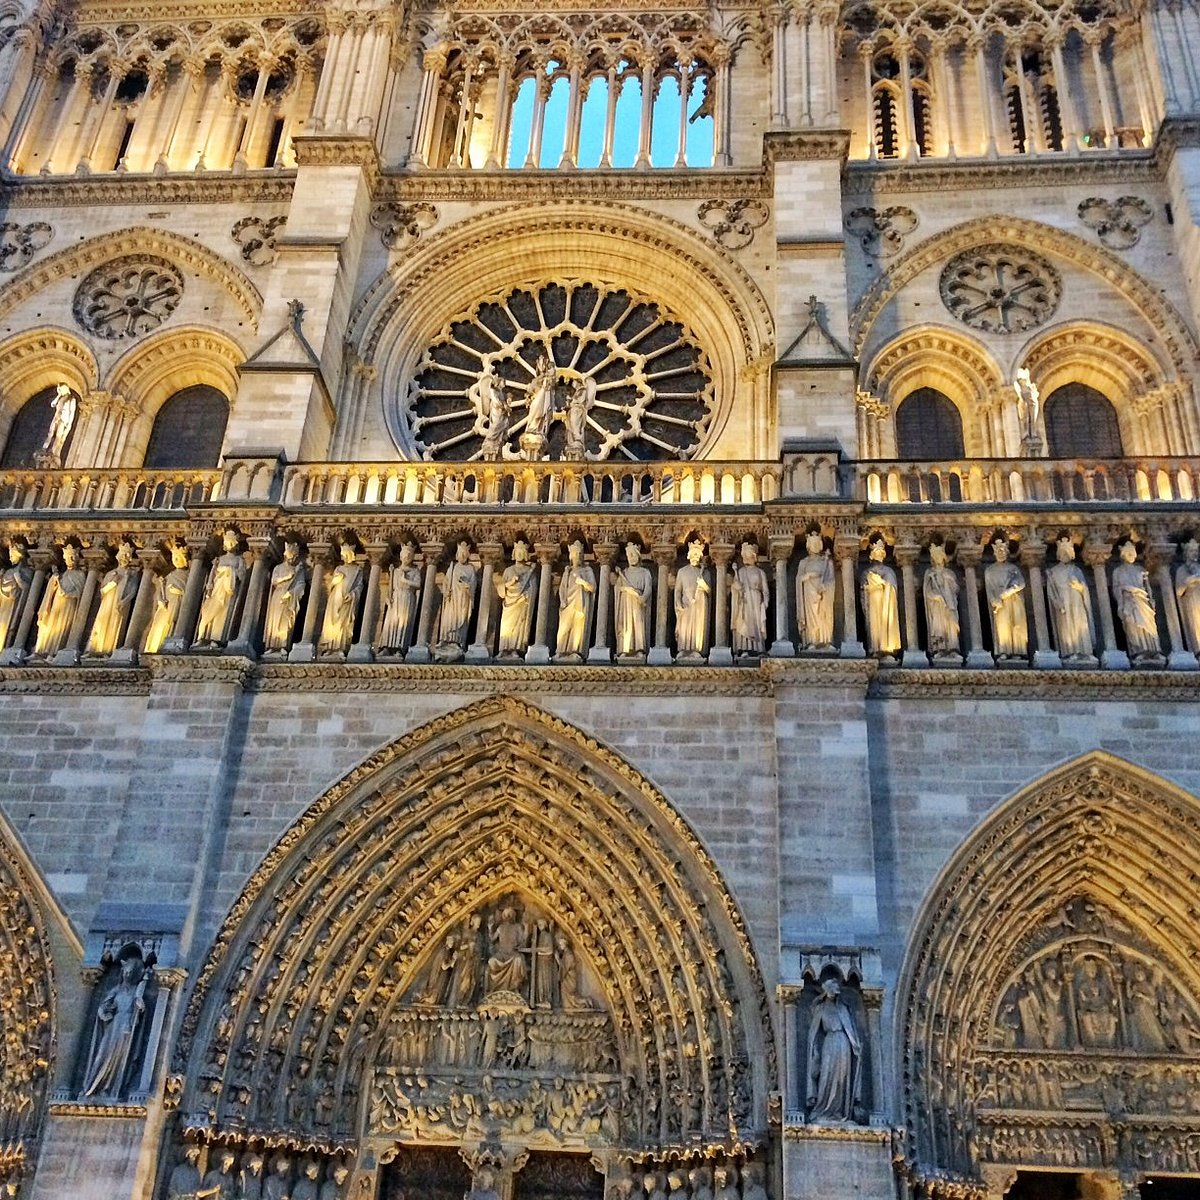 CATHÉDRALE NOTRE-DAME DE PARIS - All You Need to Know BEFORE You Go